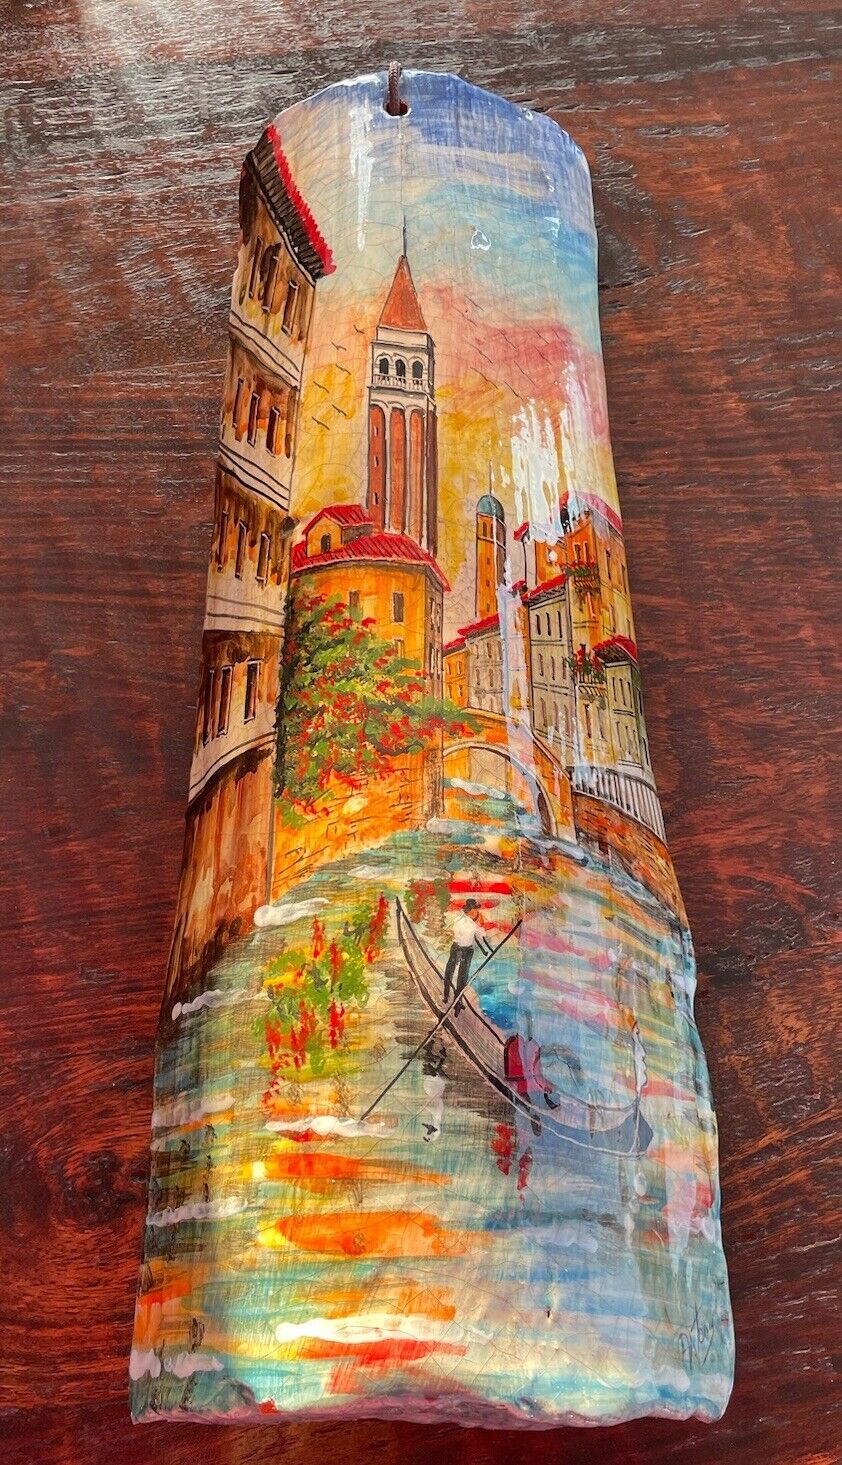 Italian Roof Tile With Hand Painted Venice “Venezia” Scene From Italy